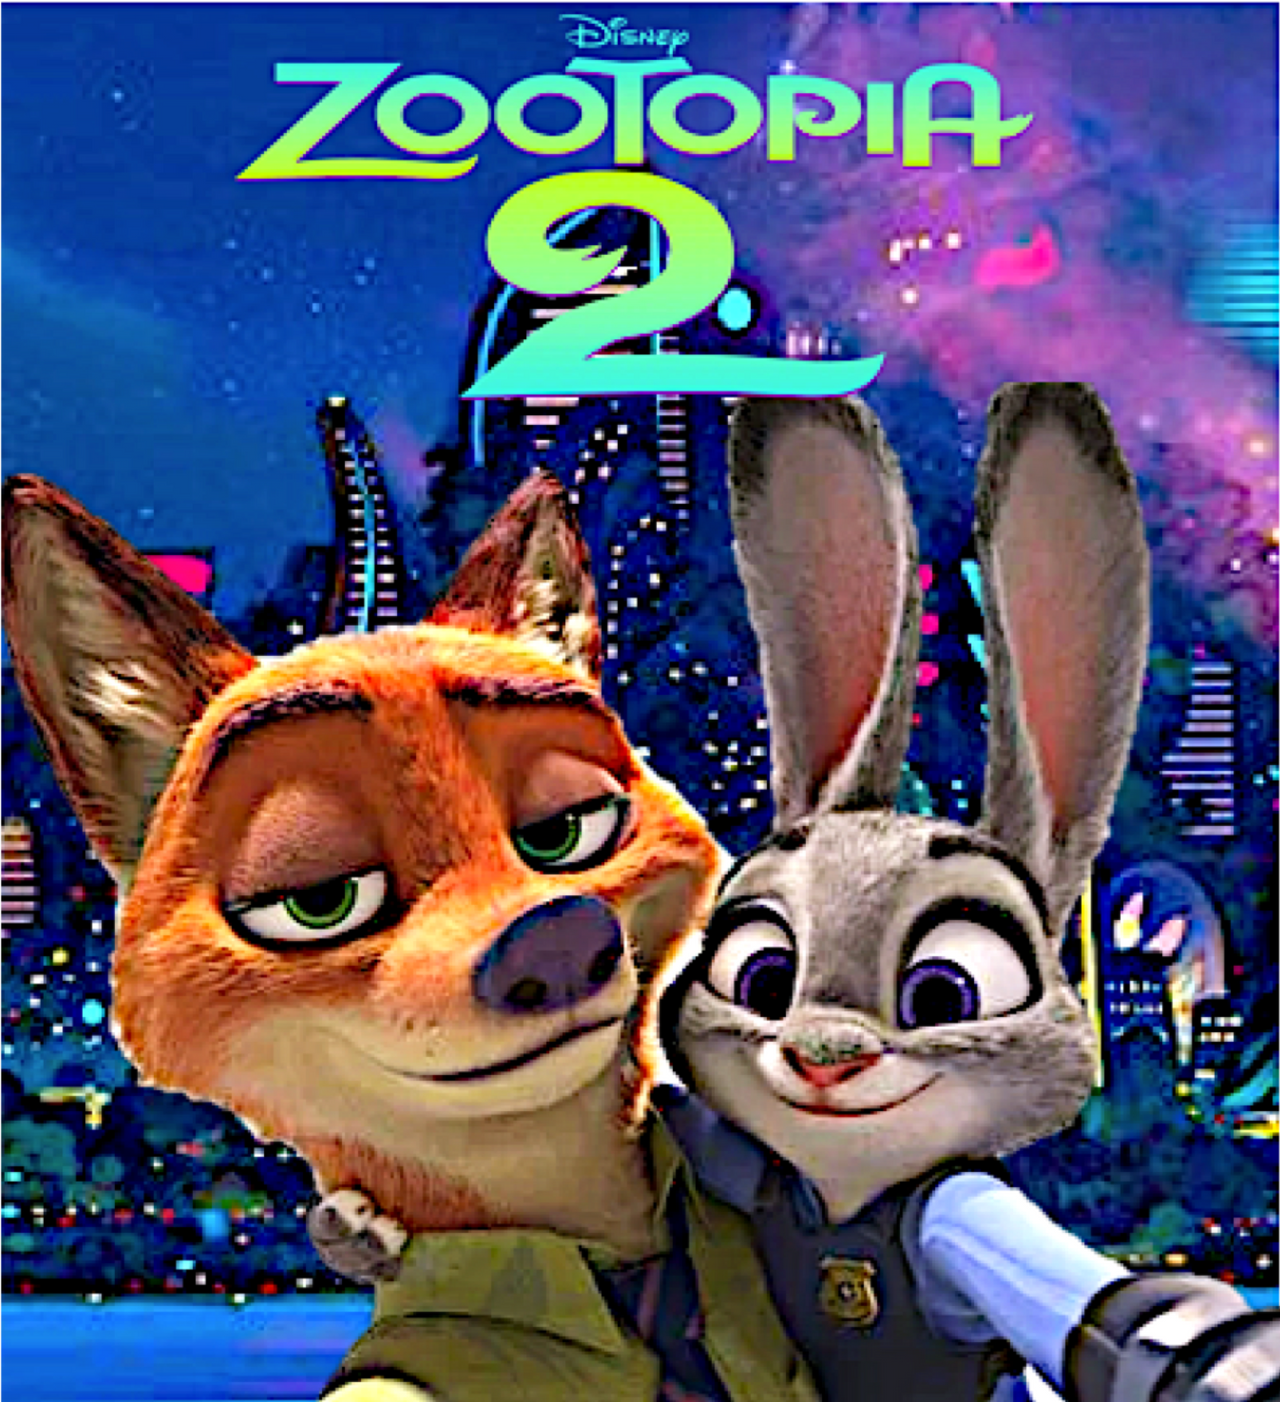 Zootopia 2 Poster by greevix04 on DeviantArt